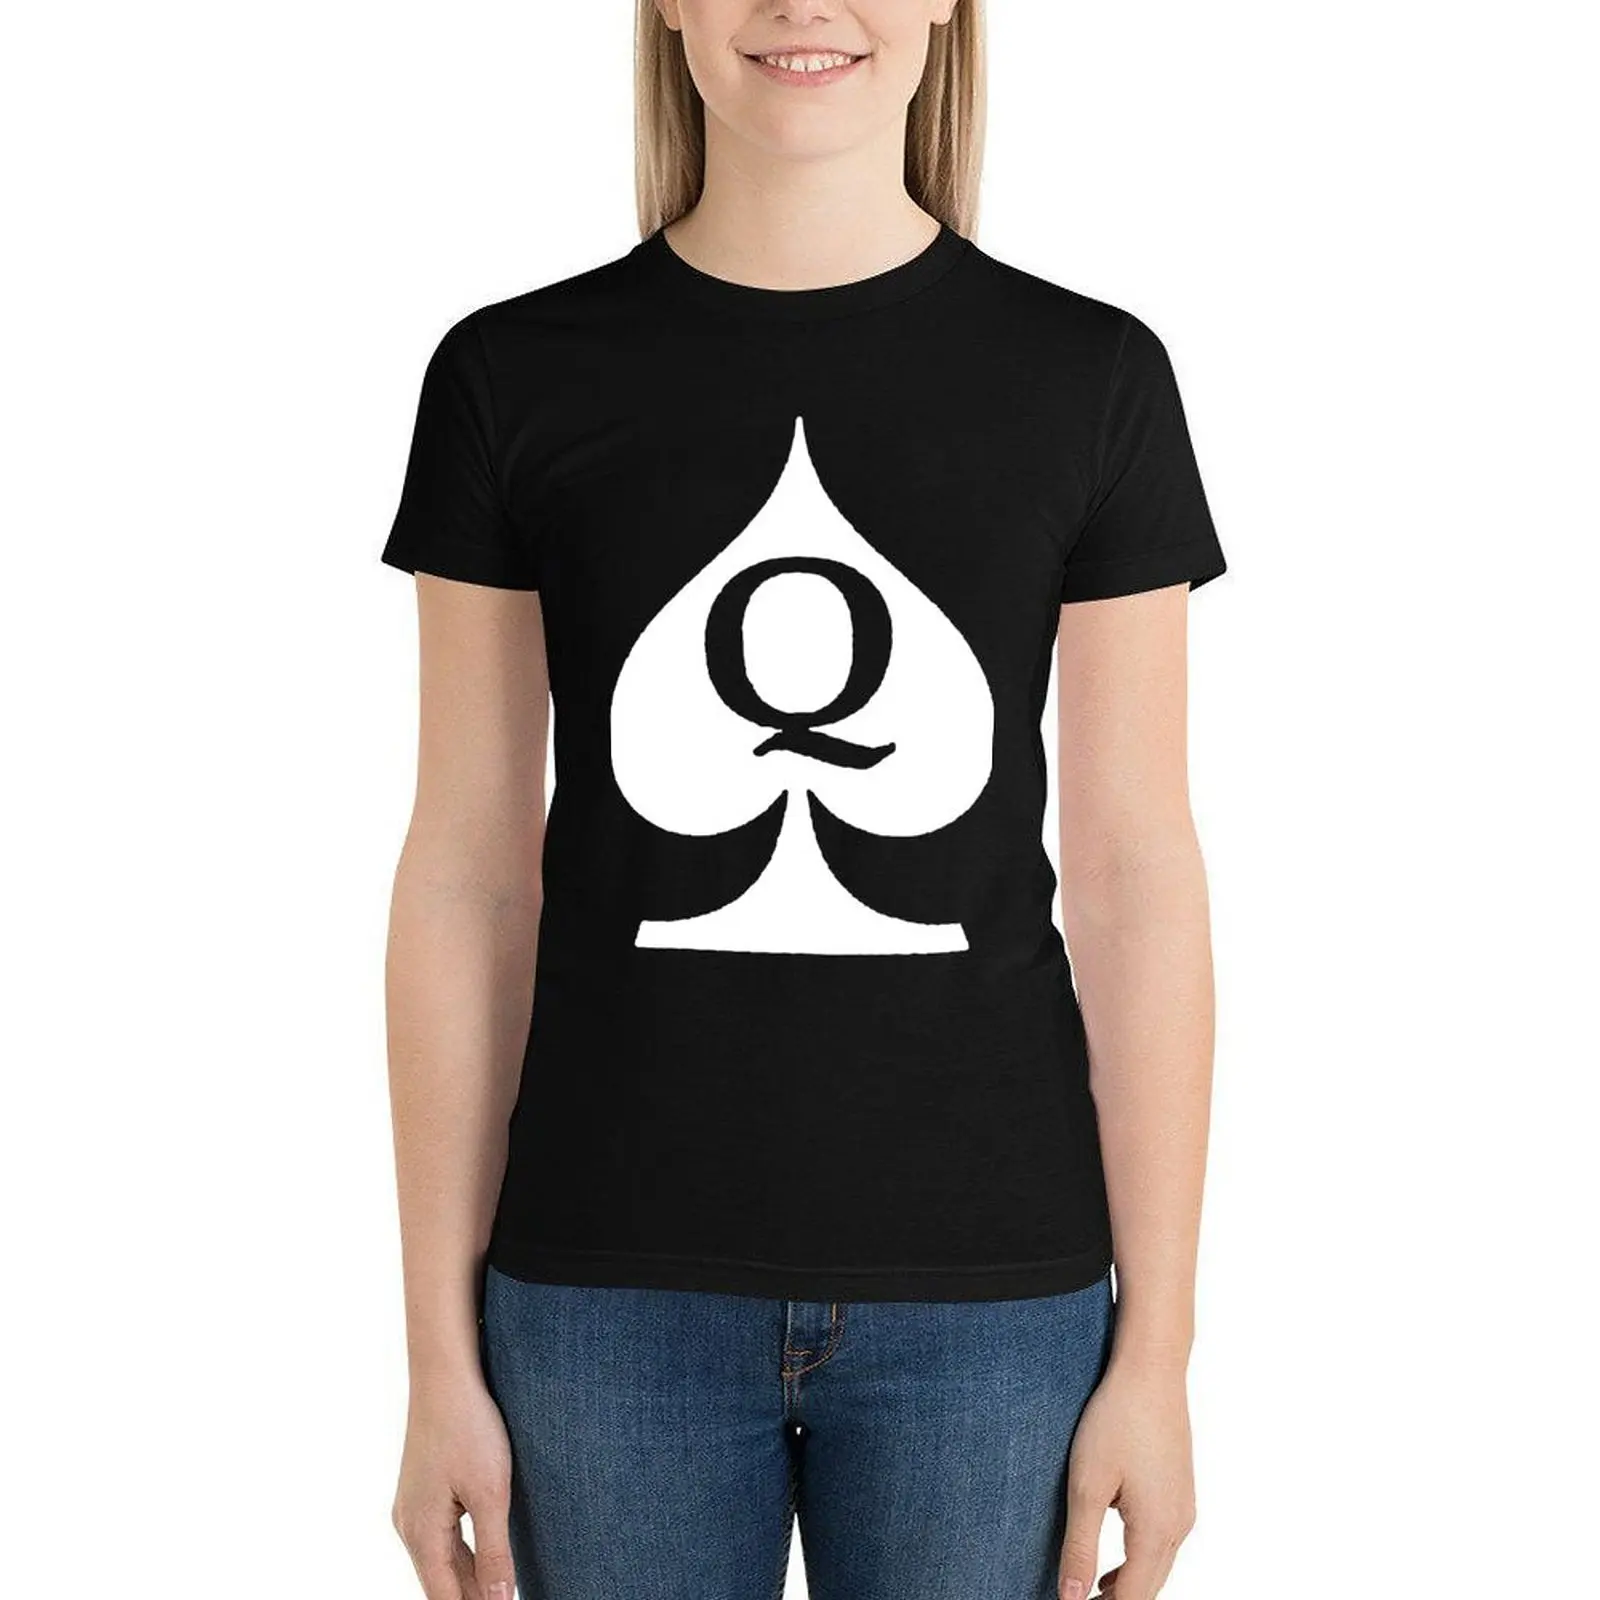 

Queen Of Spades Q T Shirt Poker Cotton Street Style T-Shirt Short-Sleeve Large Size Lady Tshirt